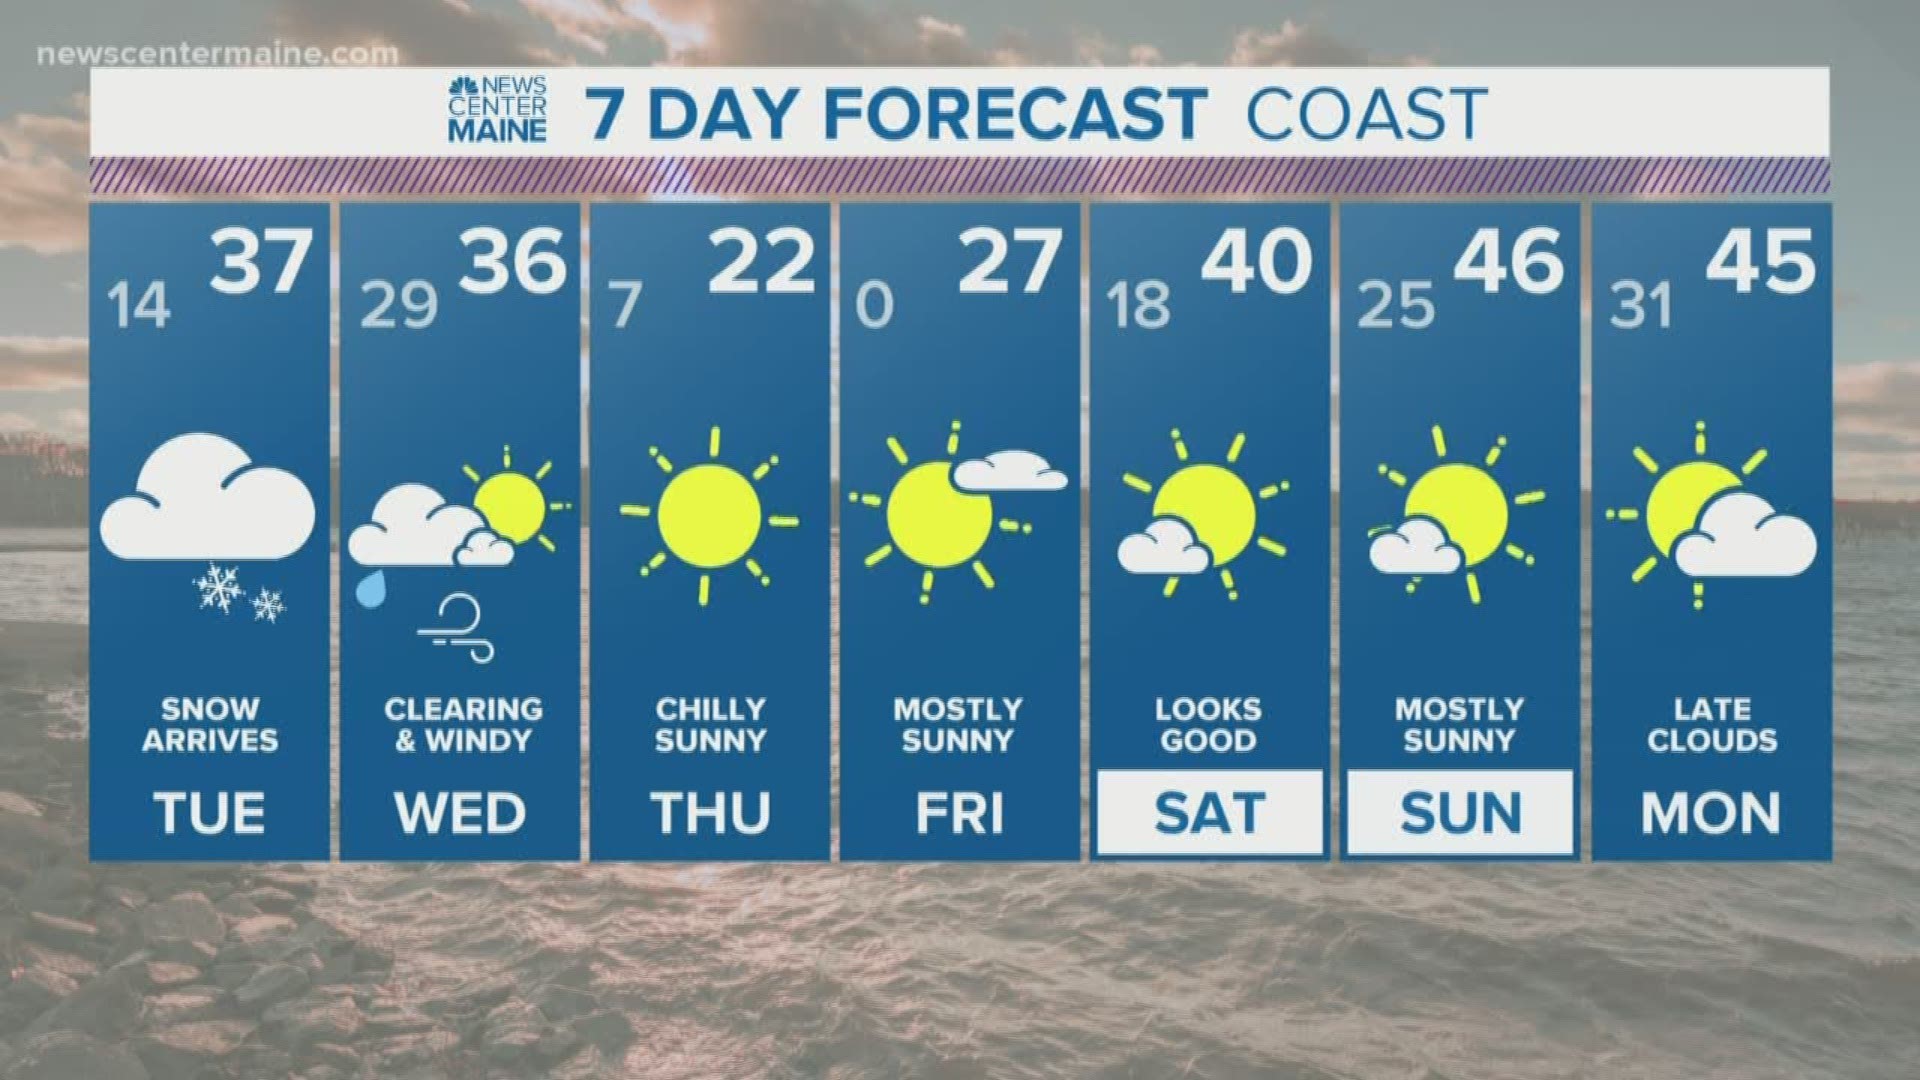 NEWS CENTER Maine Weather Video Forecast. Updated on 2/17/20 at 8 pm.